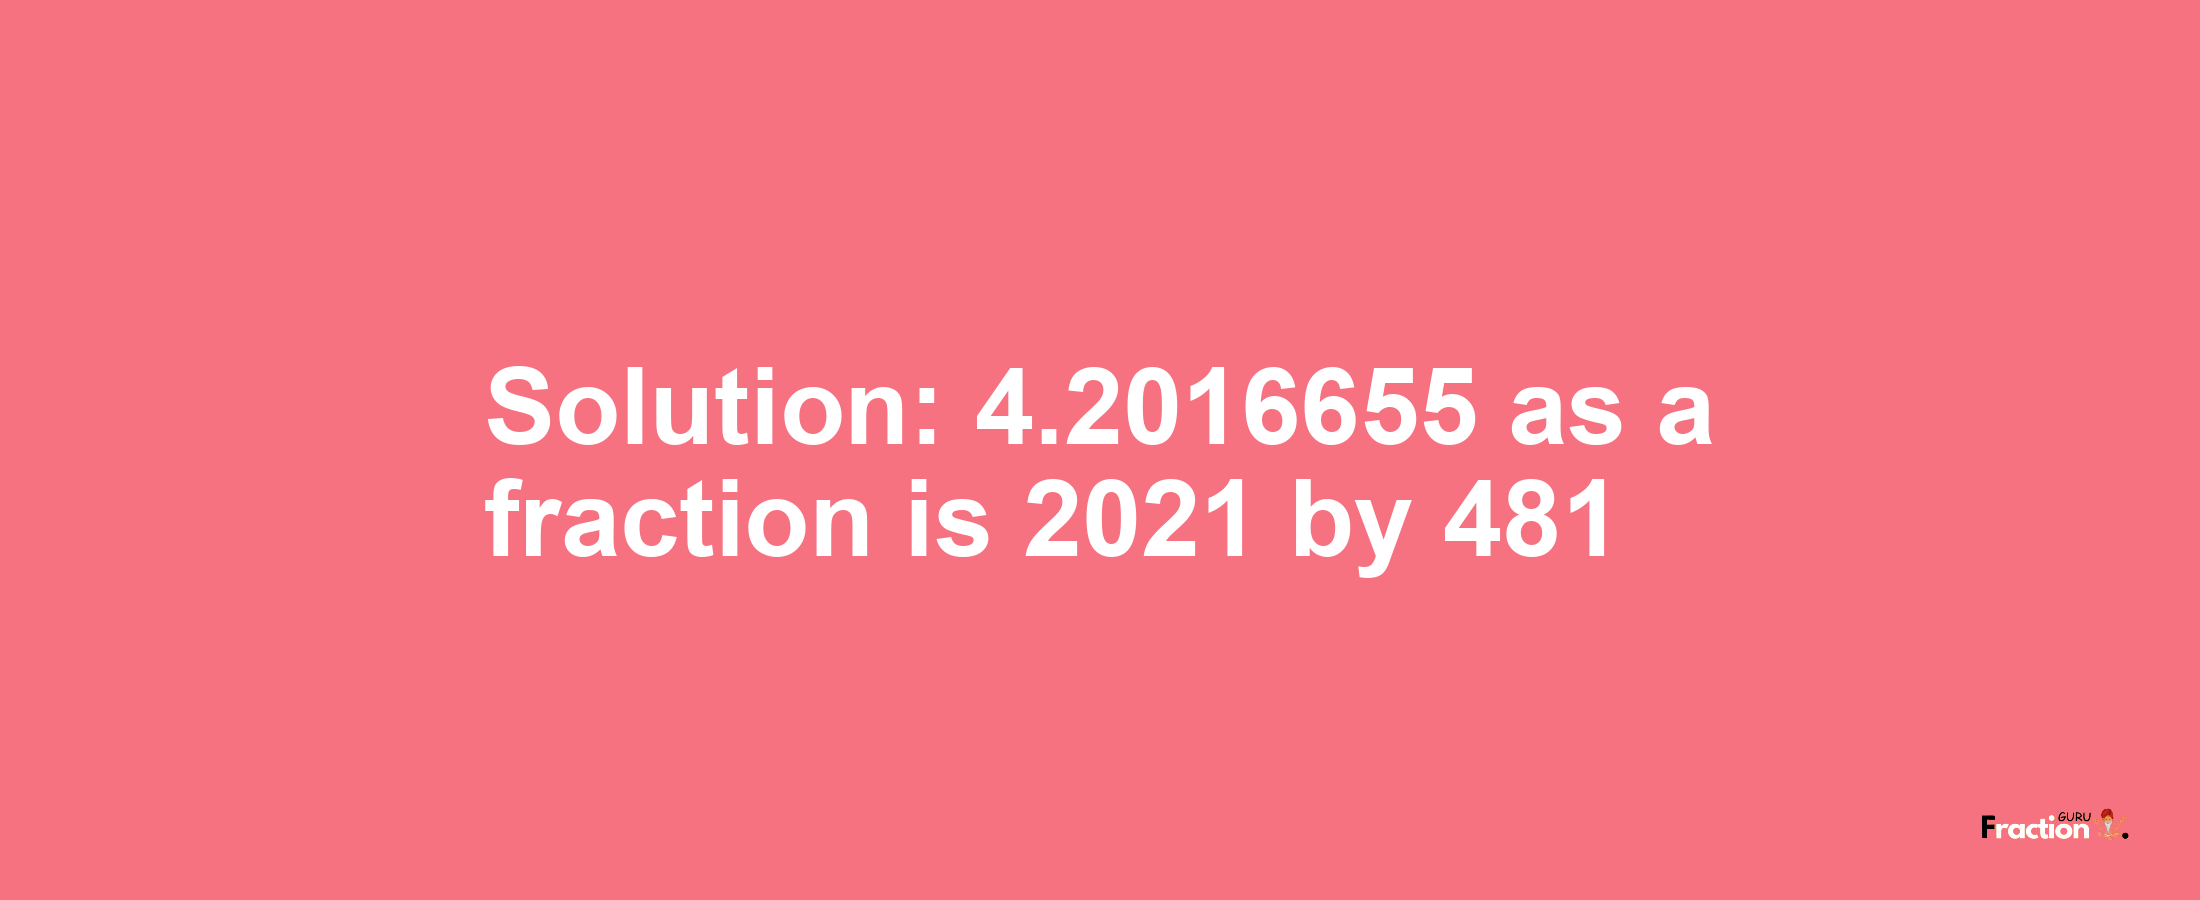 Solution:4.2016655 as a fraction is 2021/481